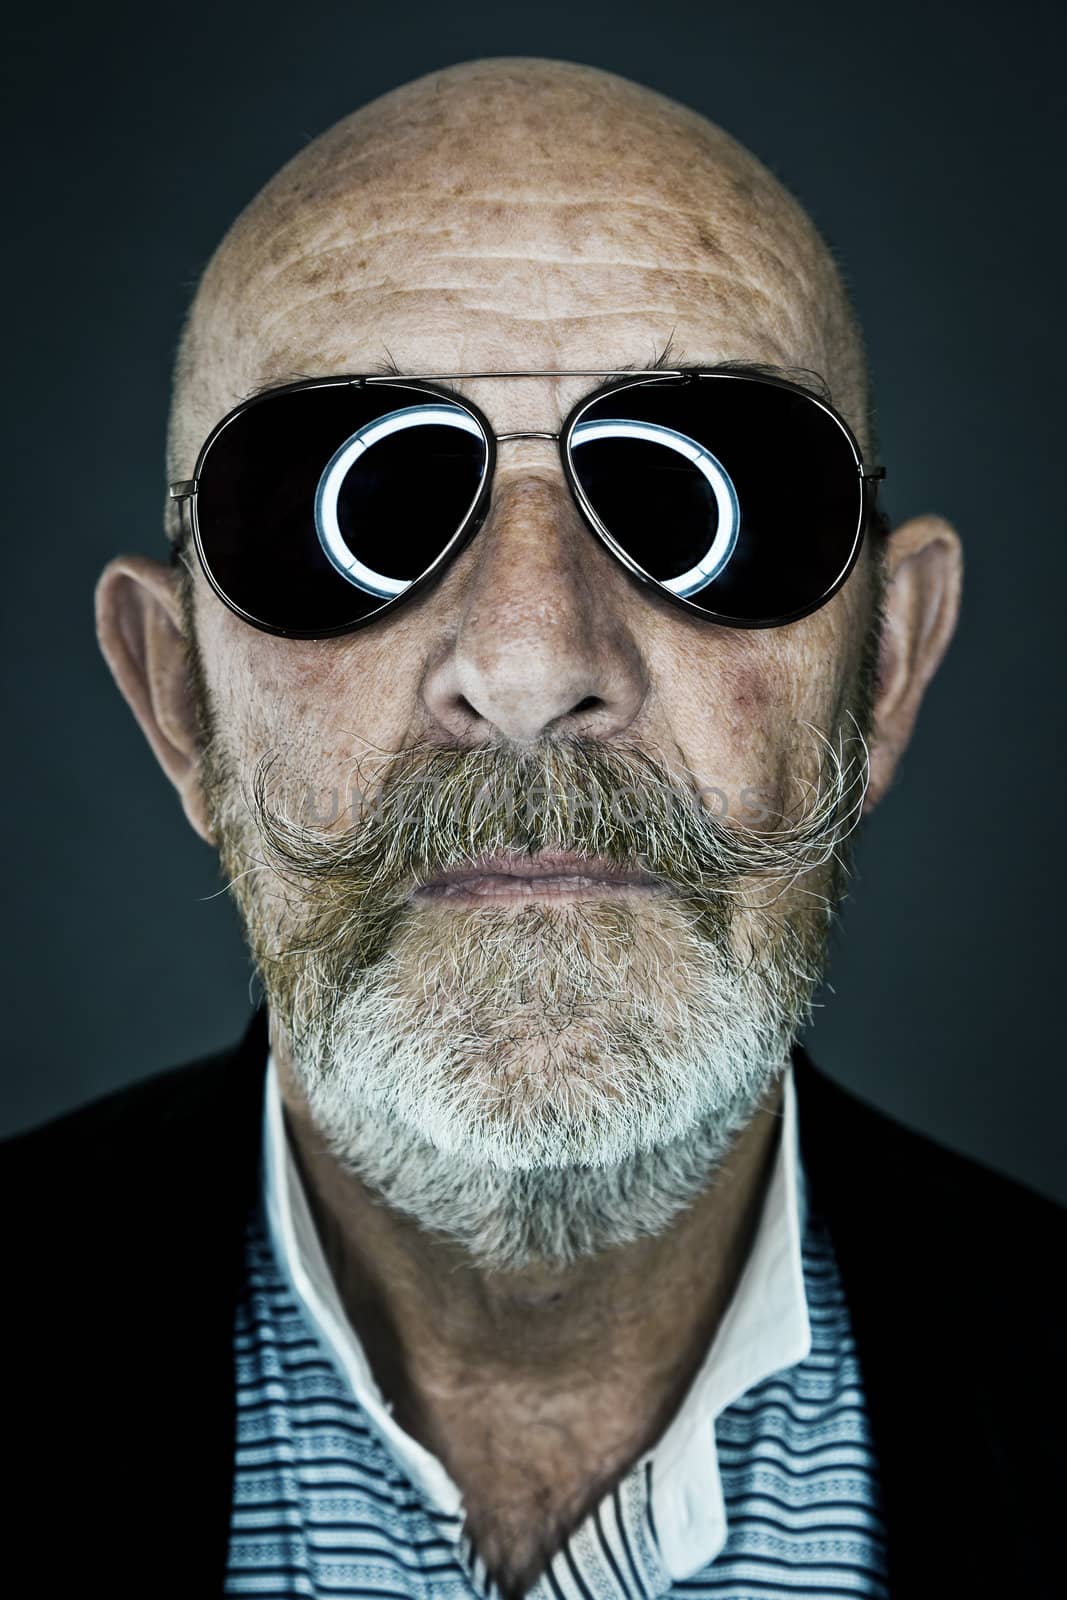 An old man with a grey beard wearing sunglasses